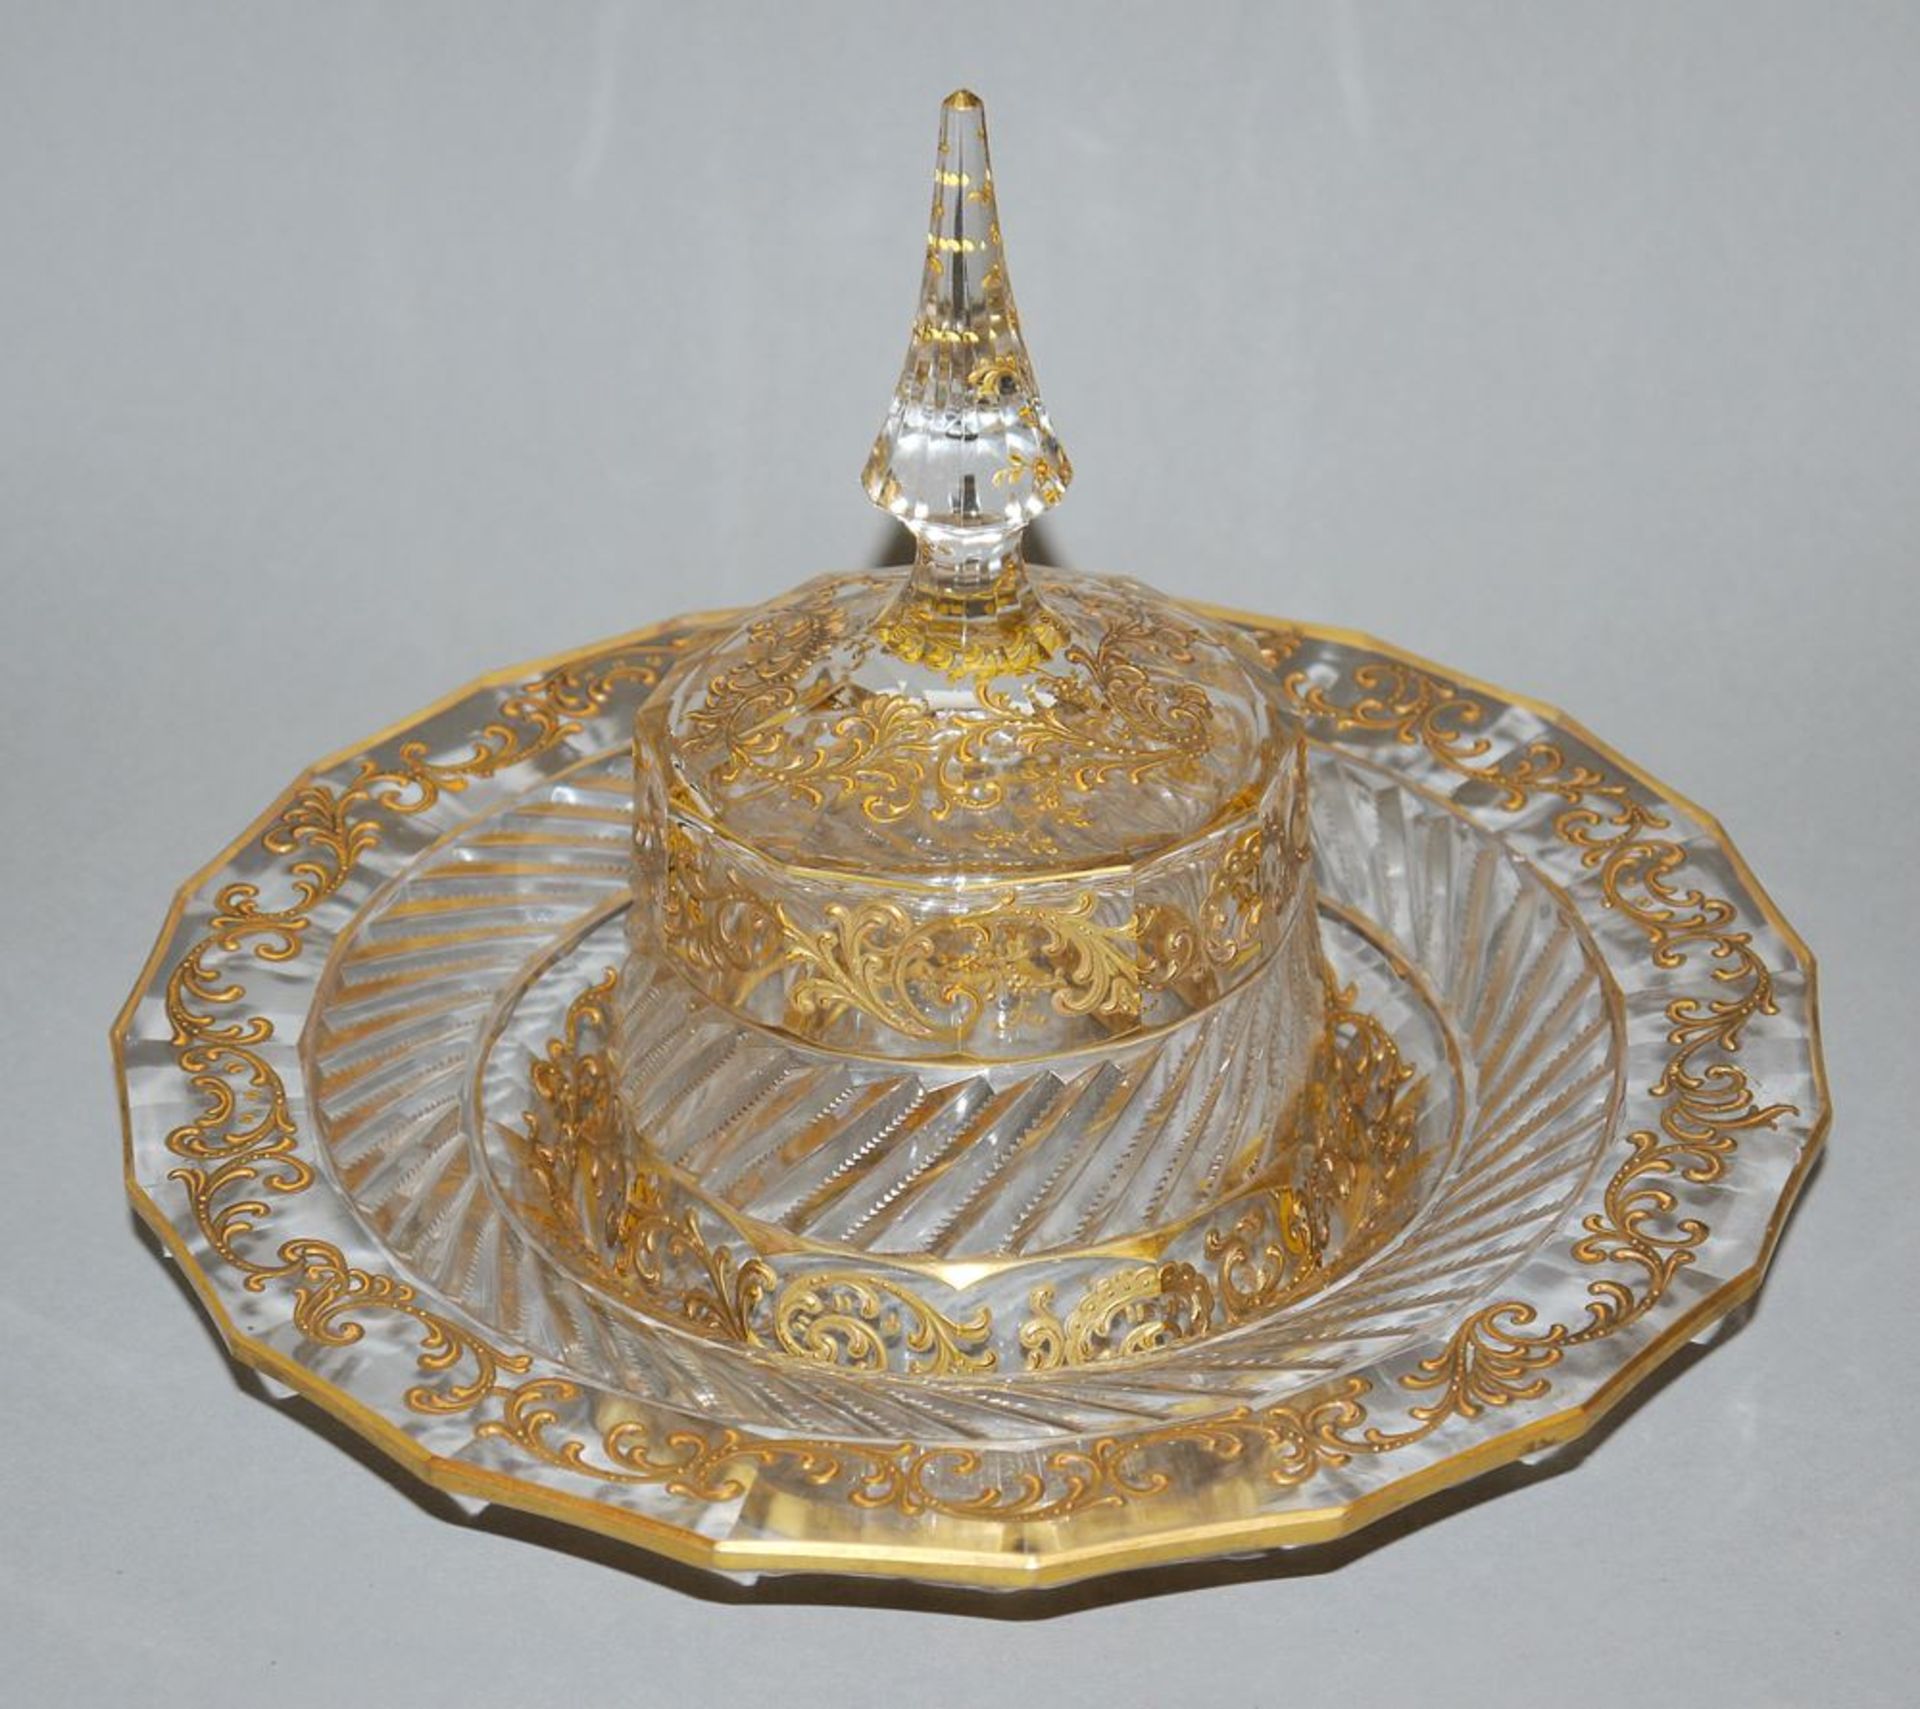 Confectionery bell from the service of an Indian Maharani, Böhmen or Venice 19th century